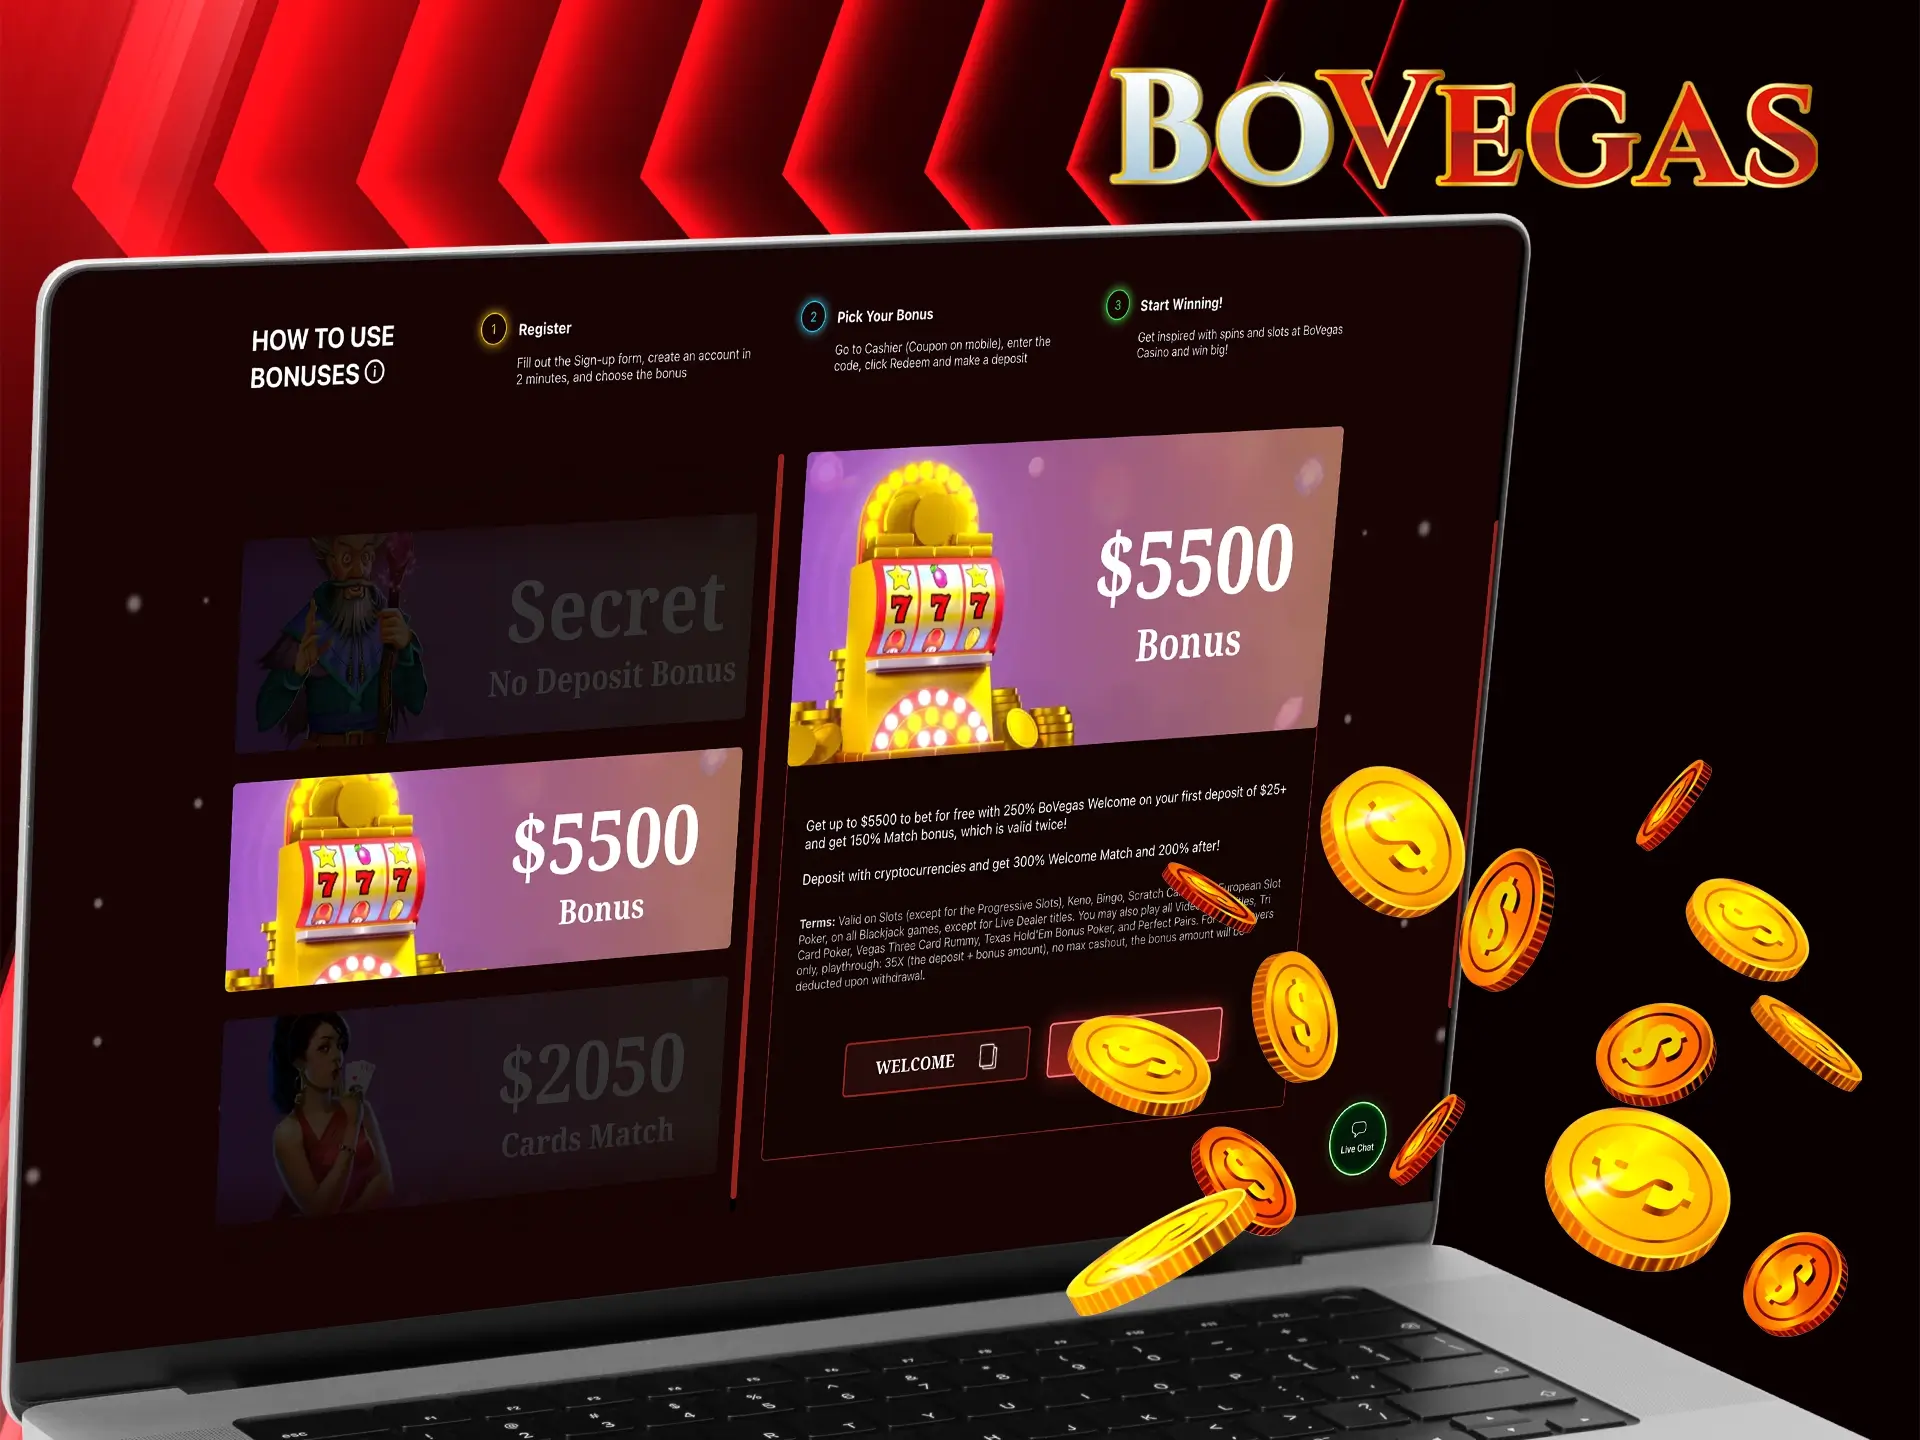 Sign up at BoVegas Casino and get your first big bonus on your first deposit.